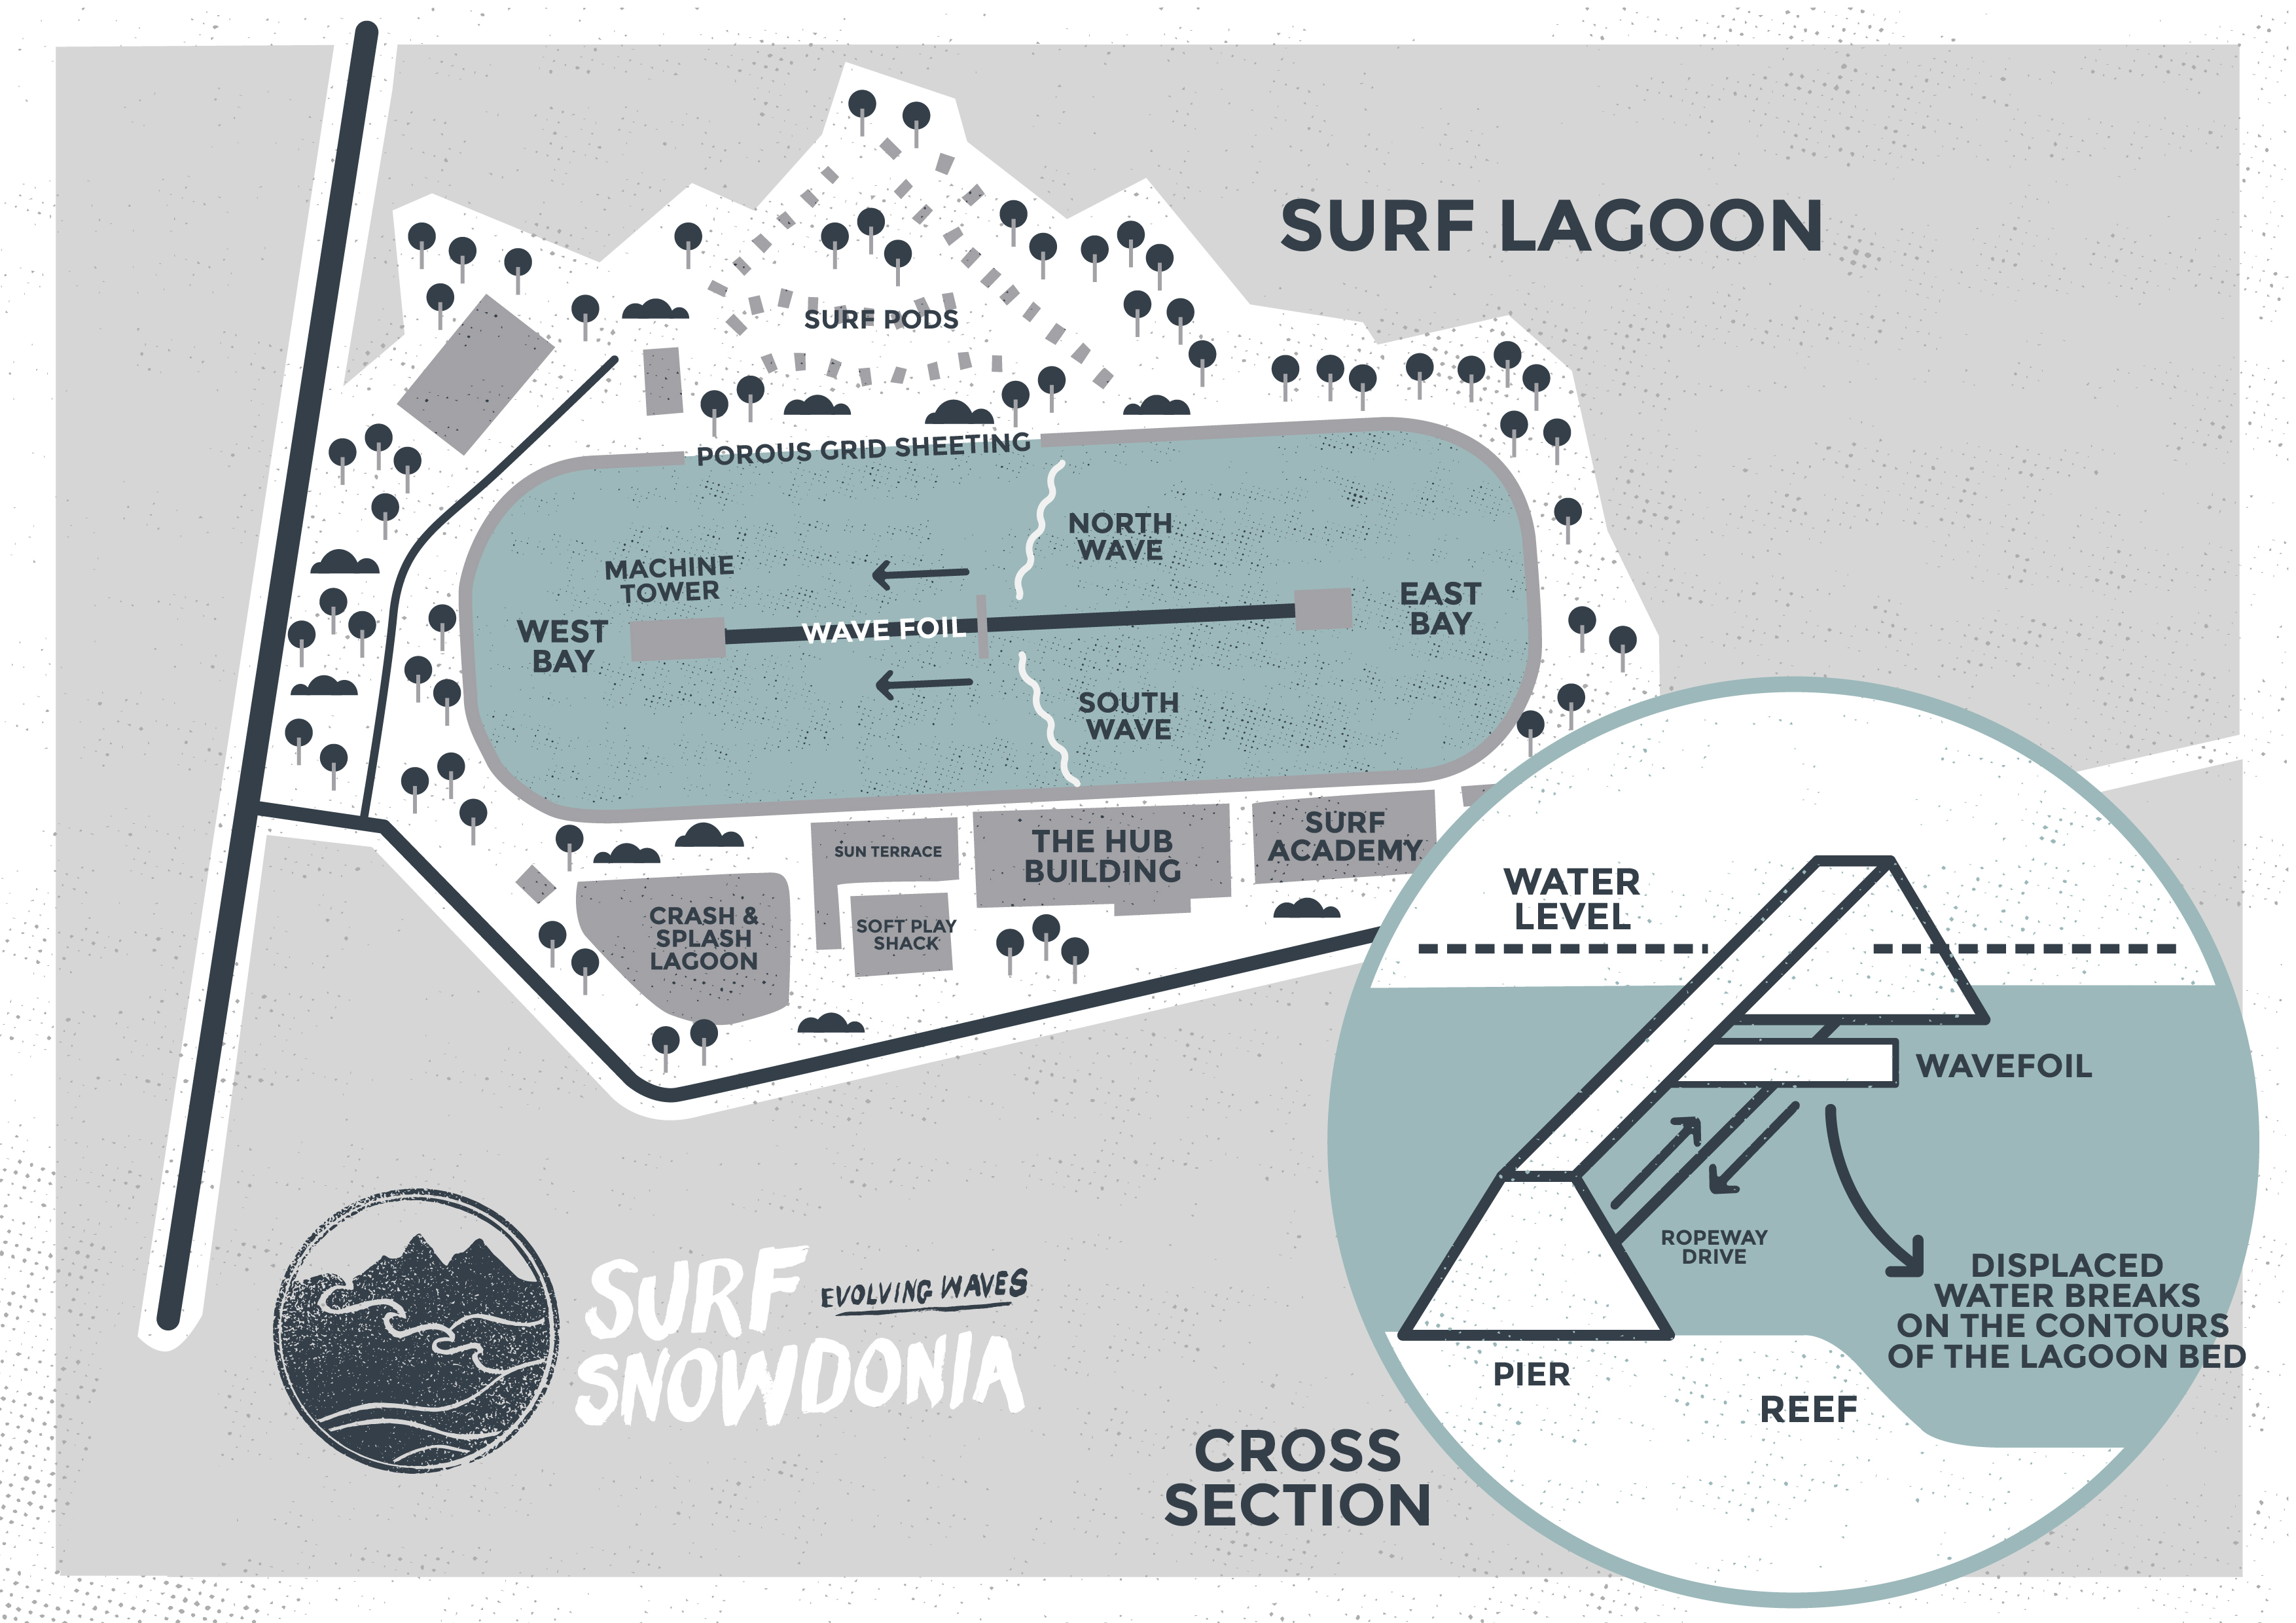 Surf Snowdonia tech overview drawing